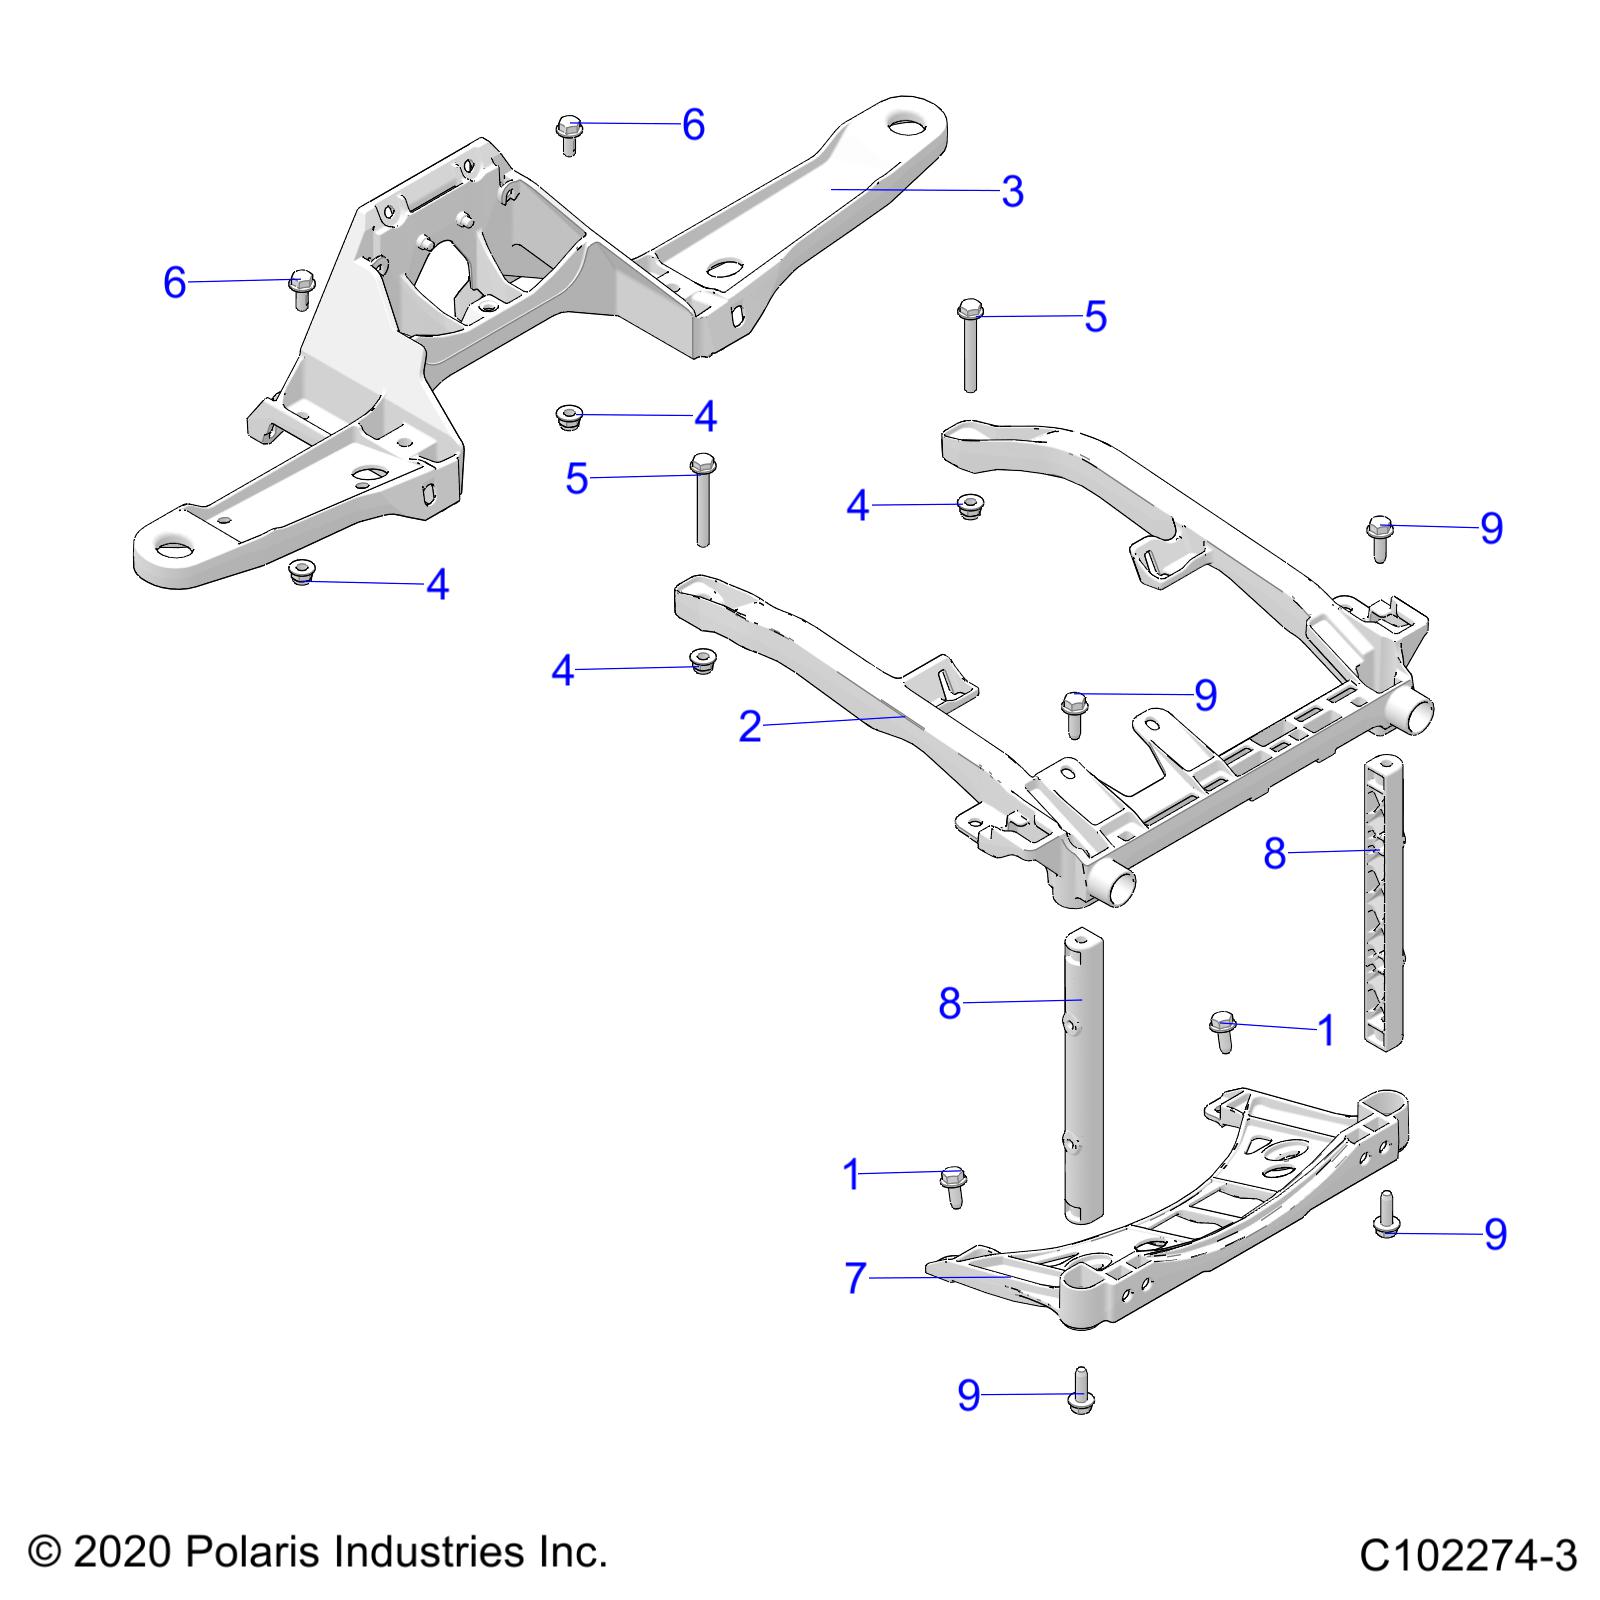 Part Number : 5632357 SUPPORT RACK  FRONT